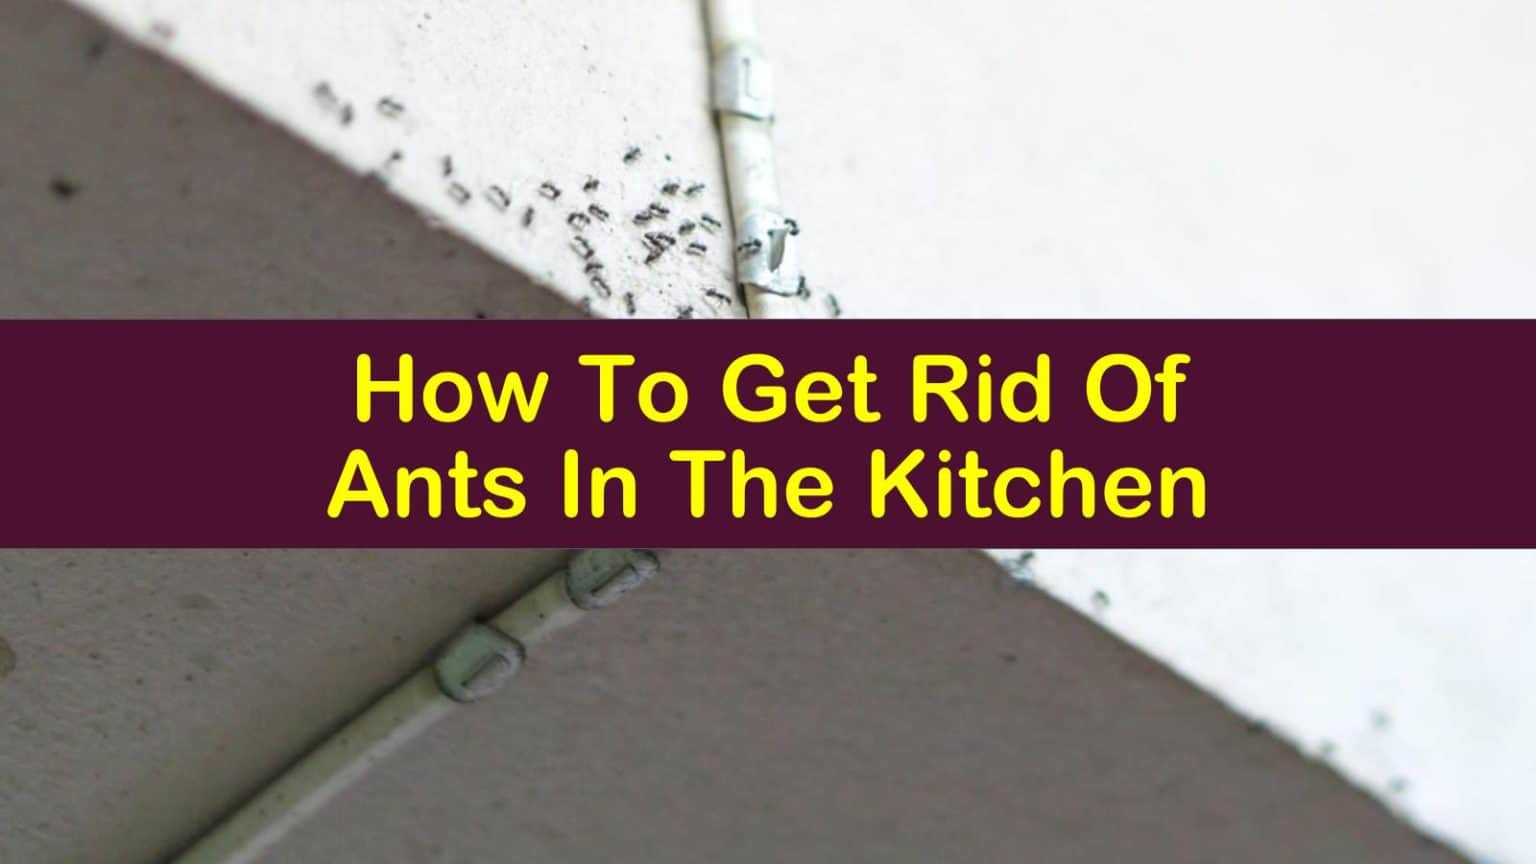 Htw How To Get Rid Of Ants In The Kitchen T1 1536x864 